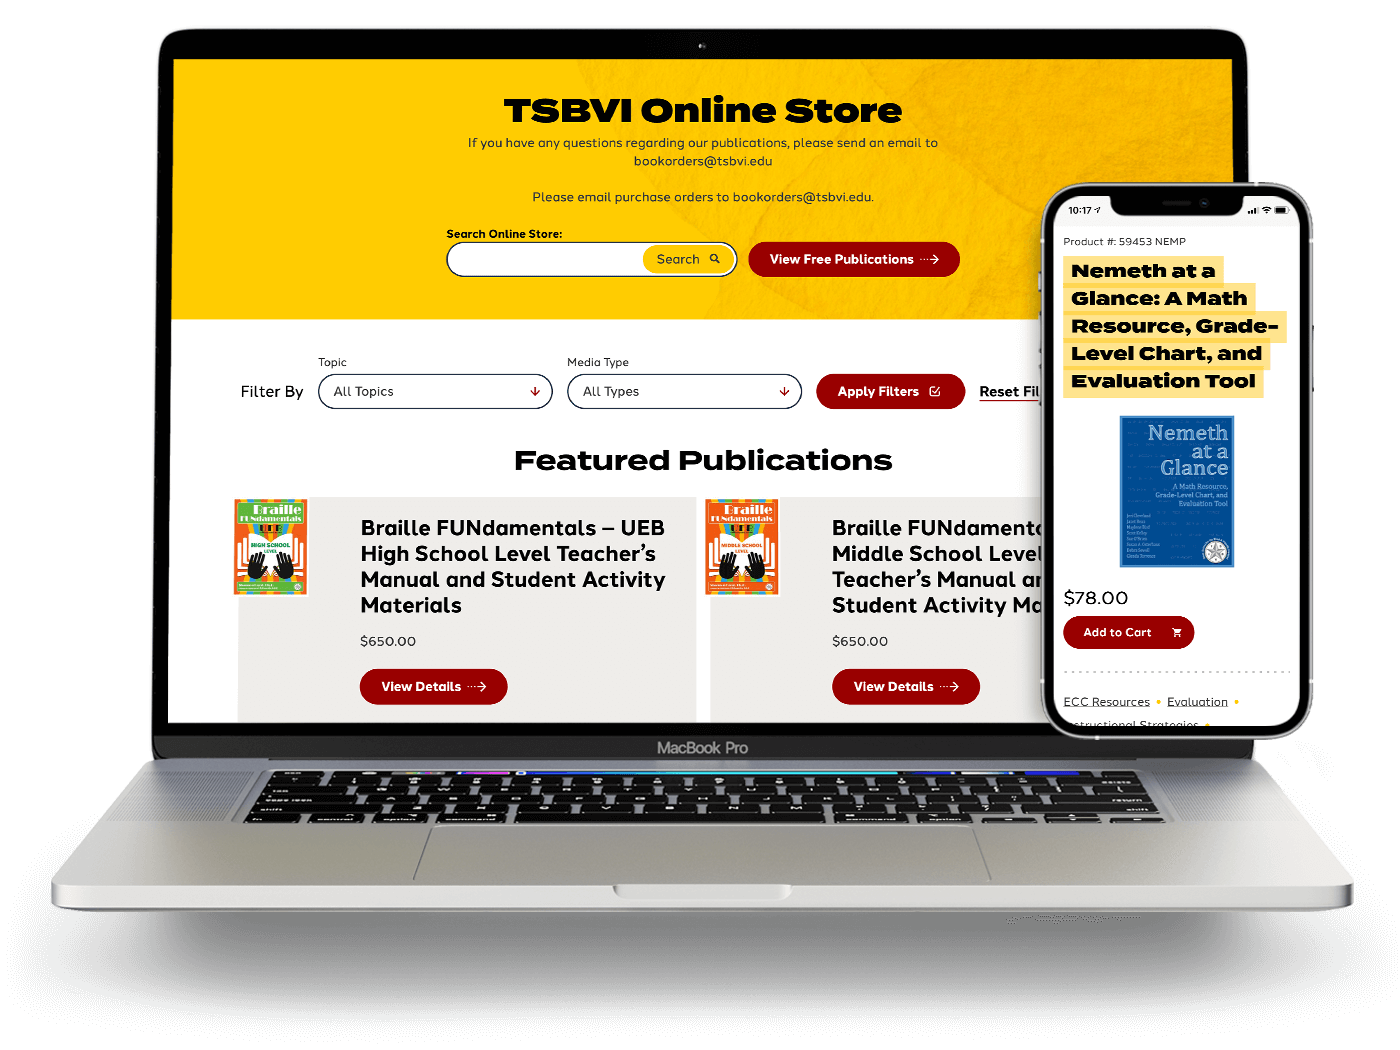 The TSBVI store on a laptop and phone